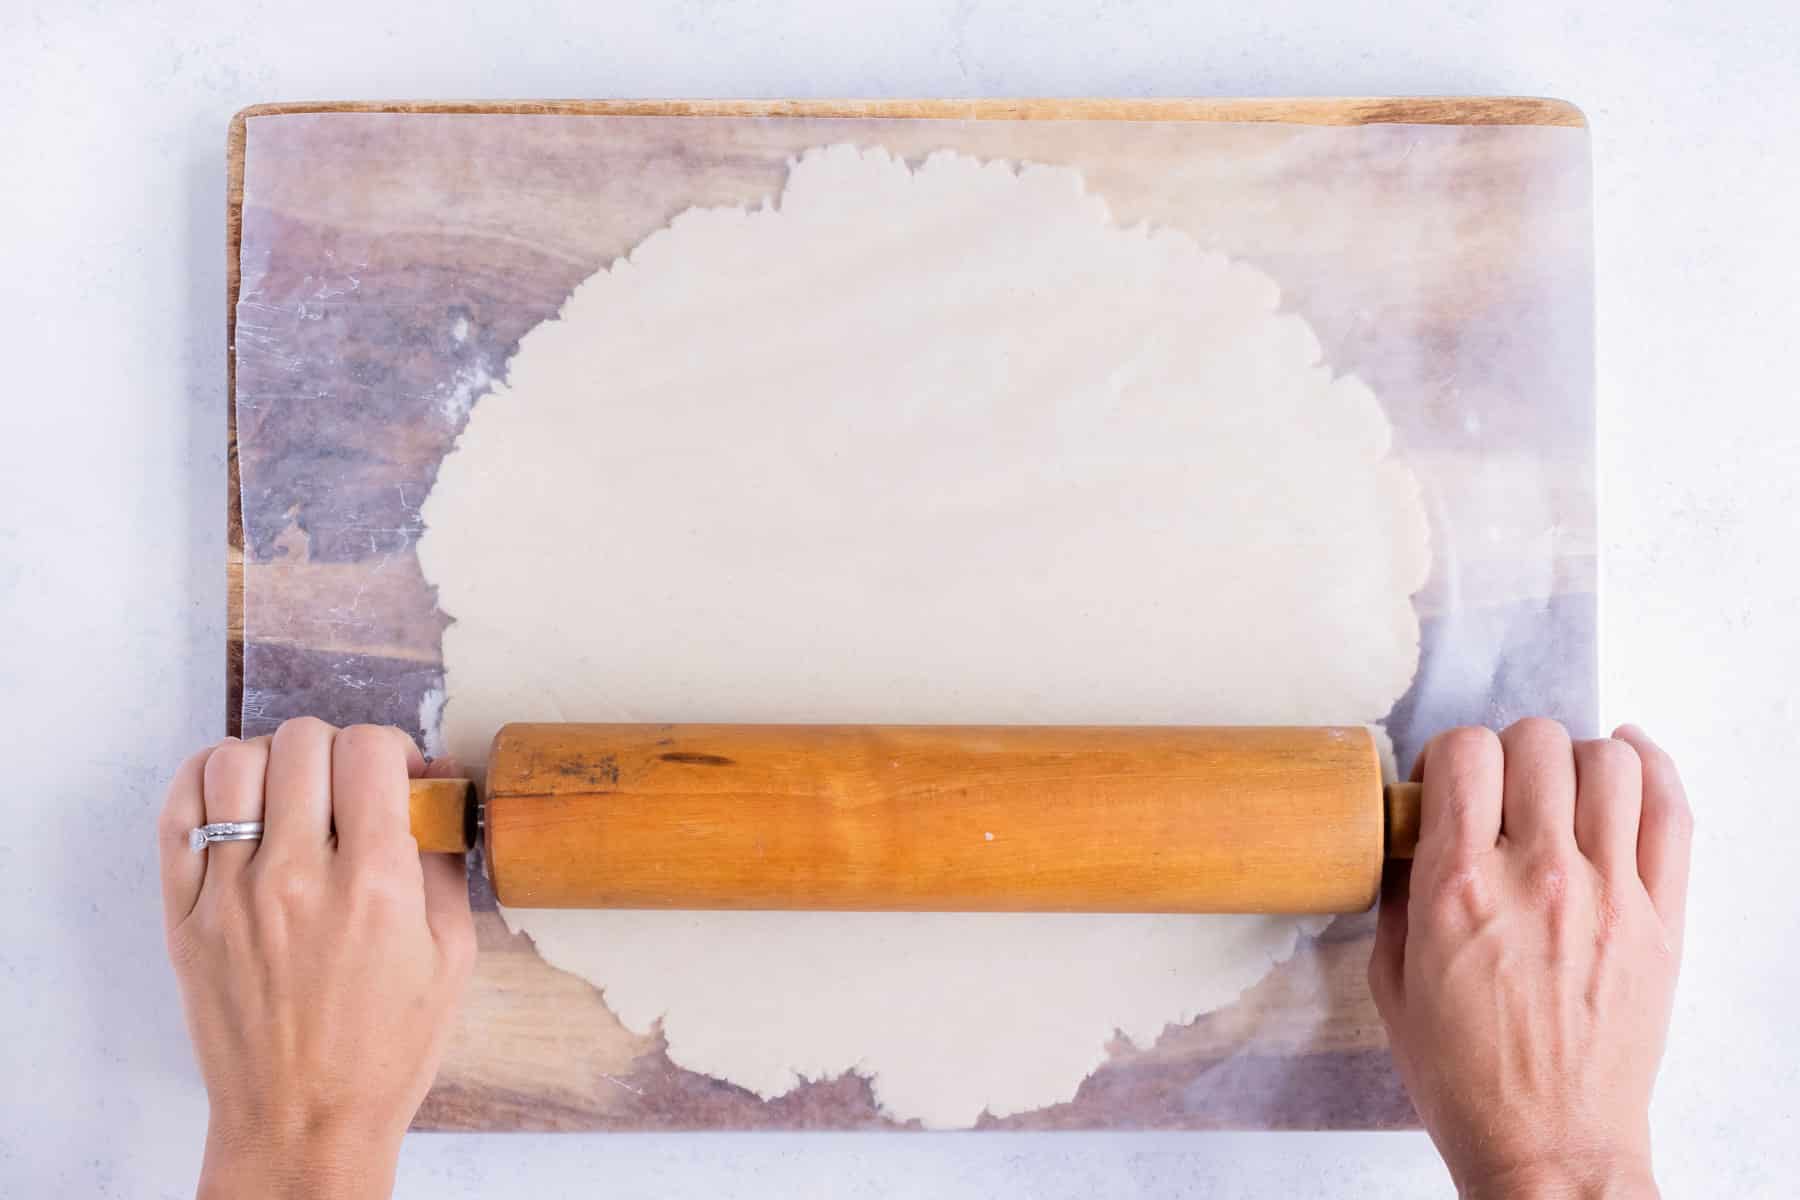 Pie dough is rolled out on a floured surface with wax paper over the dough.